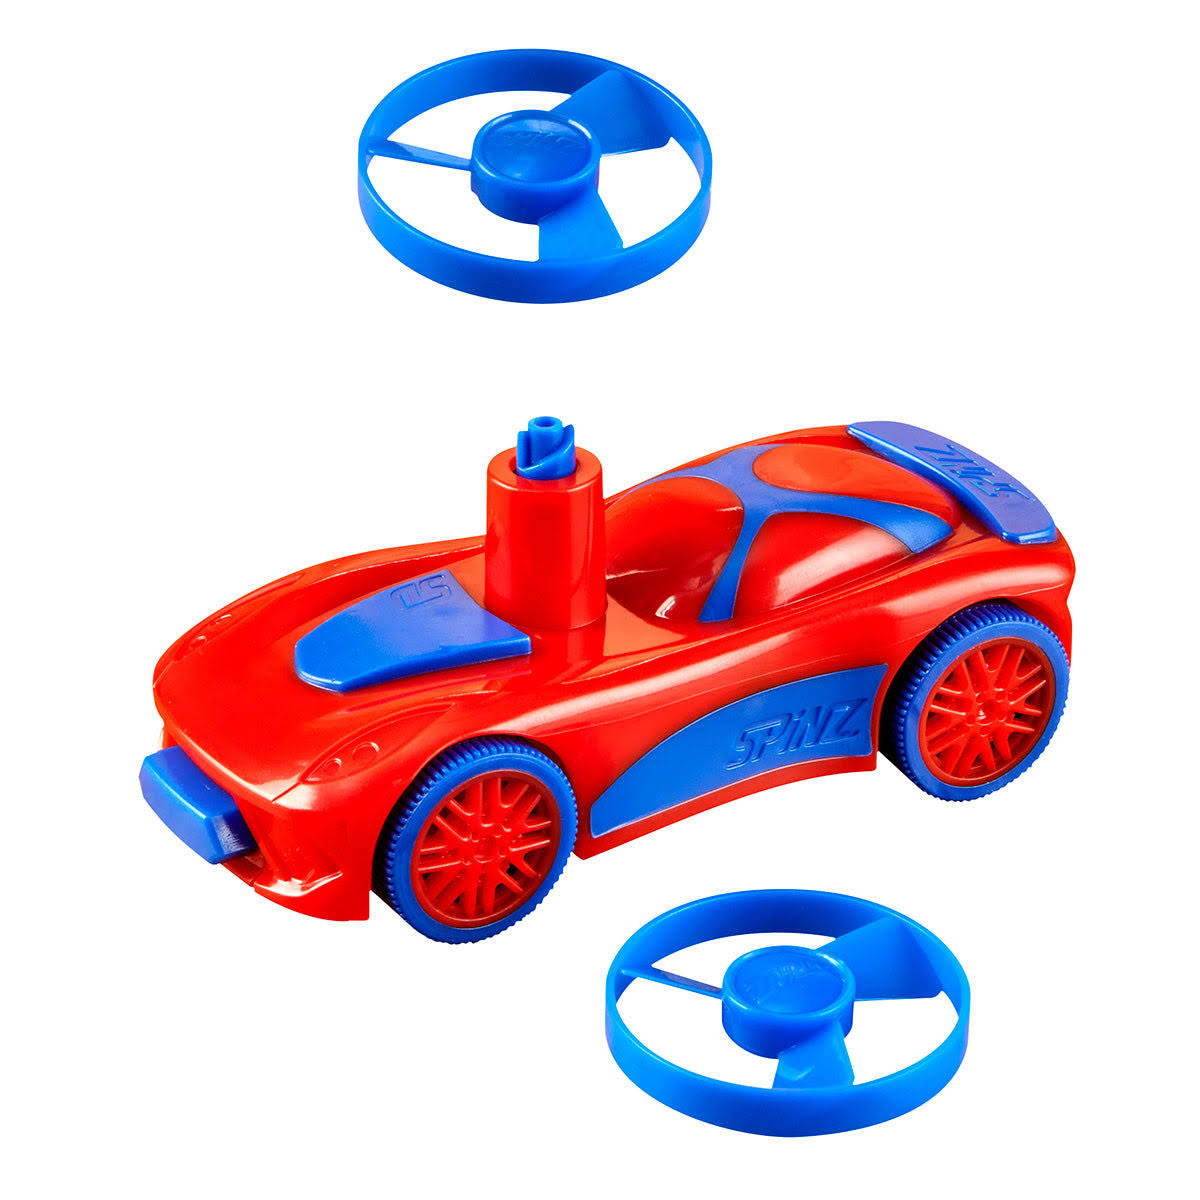 Skullduggery Spinz Pull-Back Race Car with Flying Disc - Red / Blue , 2.25 x 4.75 x 3"